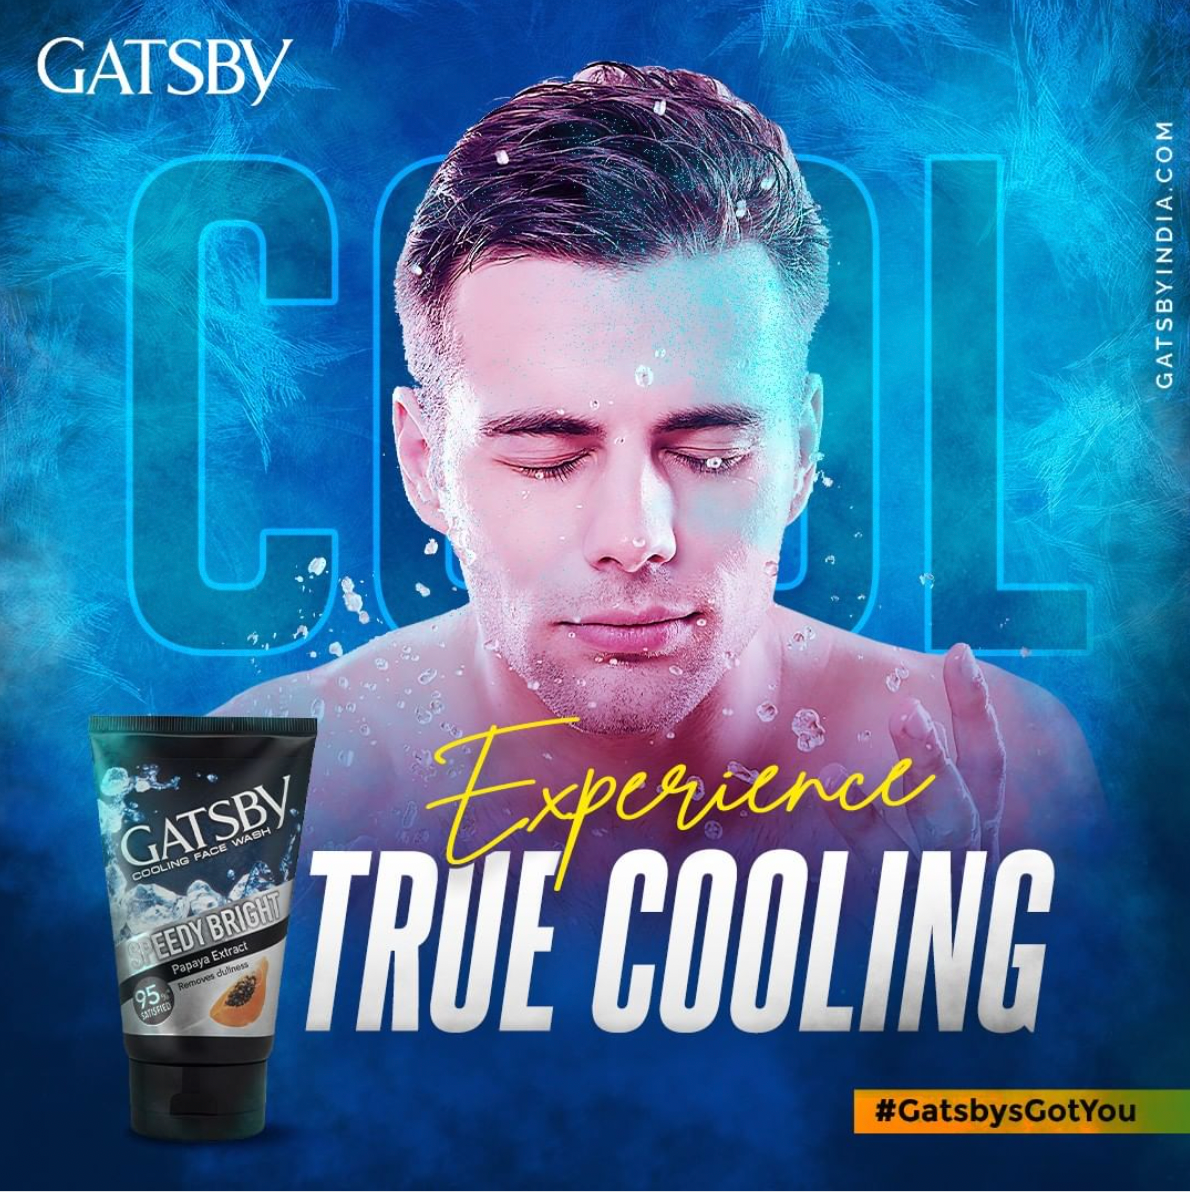 Gatsby Cooling Face Wash - Clear Whitening, 100g Gardenia Cosmotrade LLP